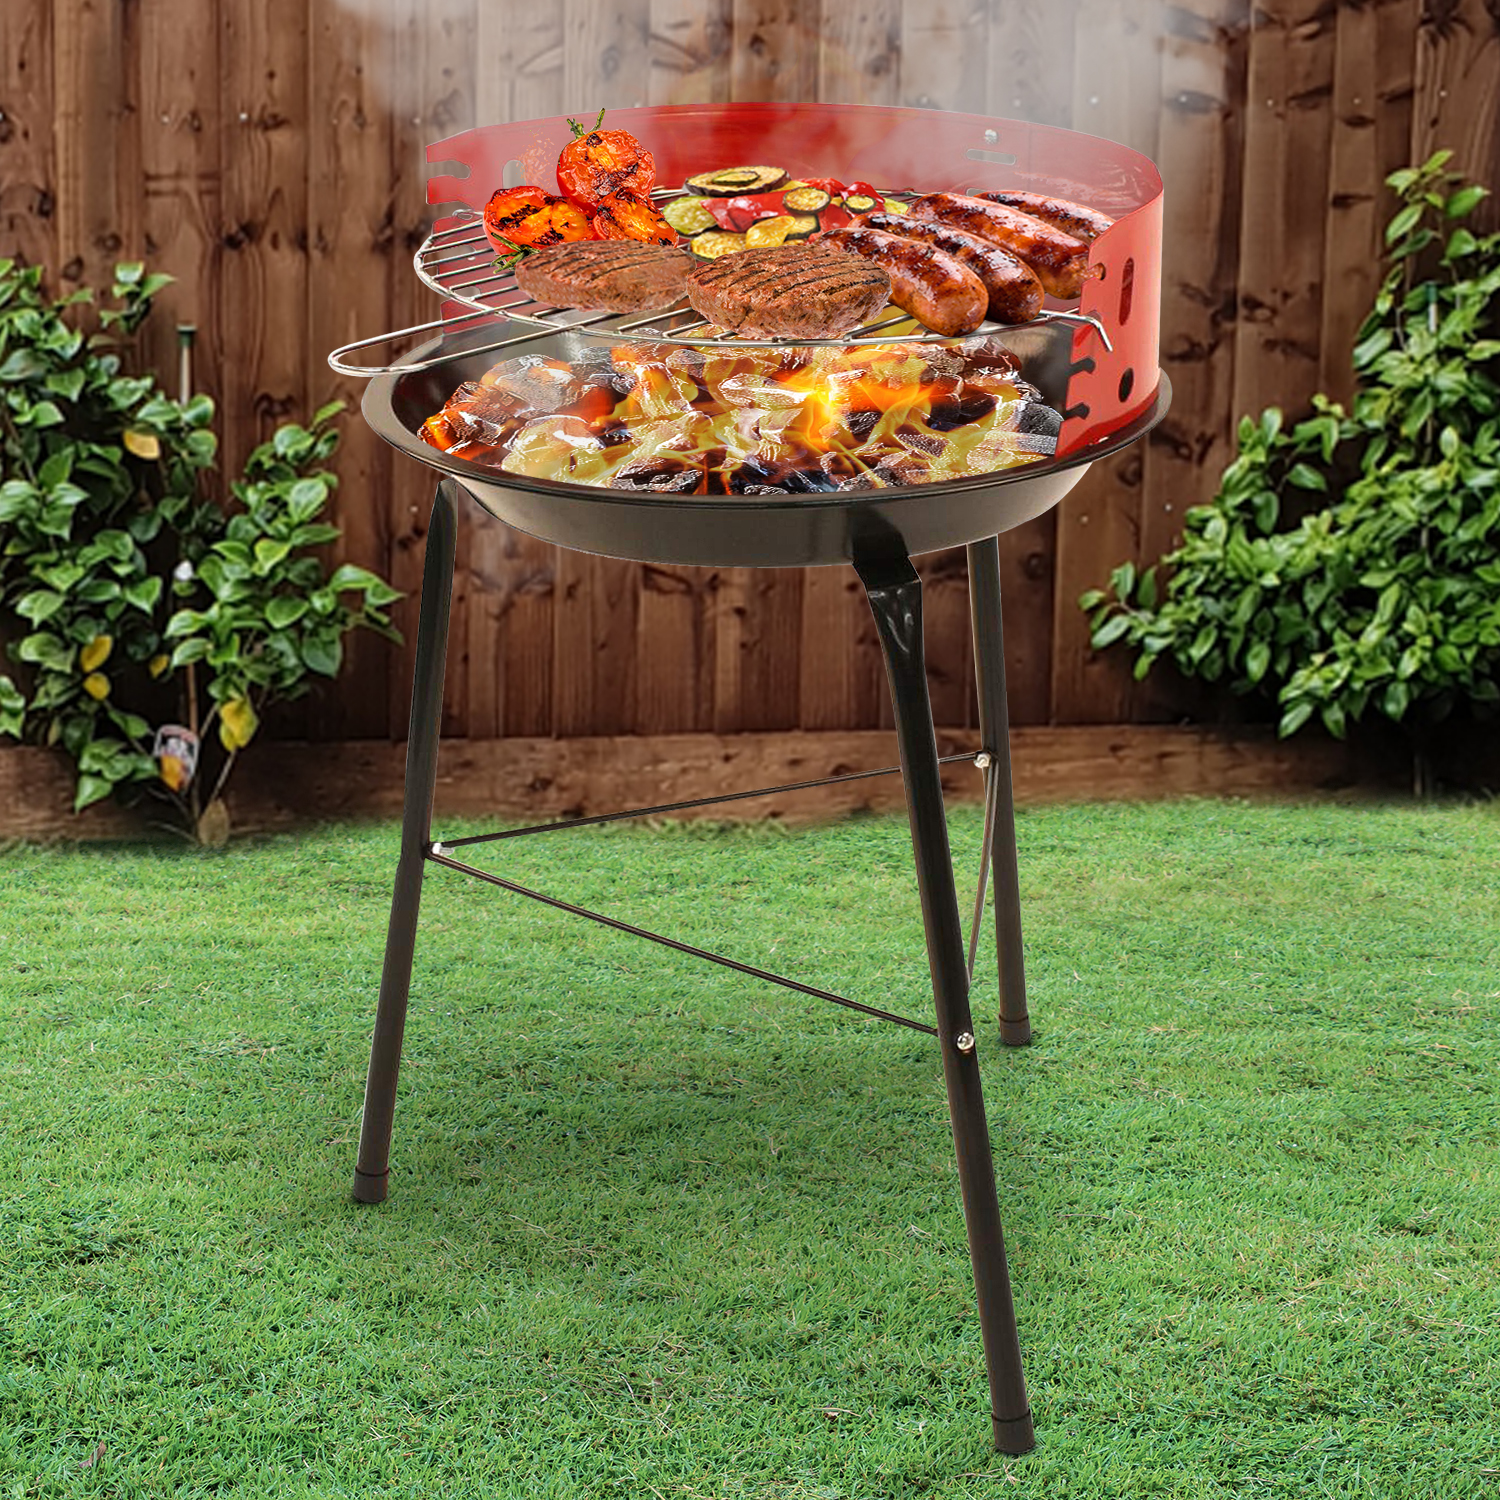 Black & Red Compact Picnic Grill with Wind Shield - WeeklyDeals4Less